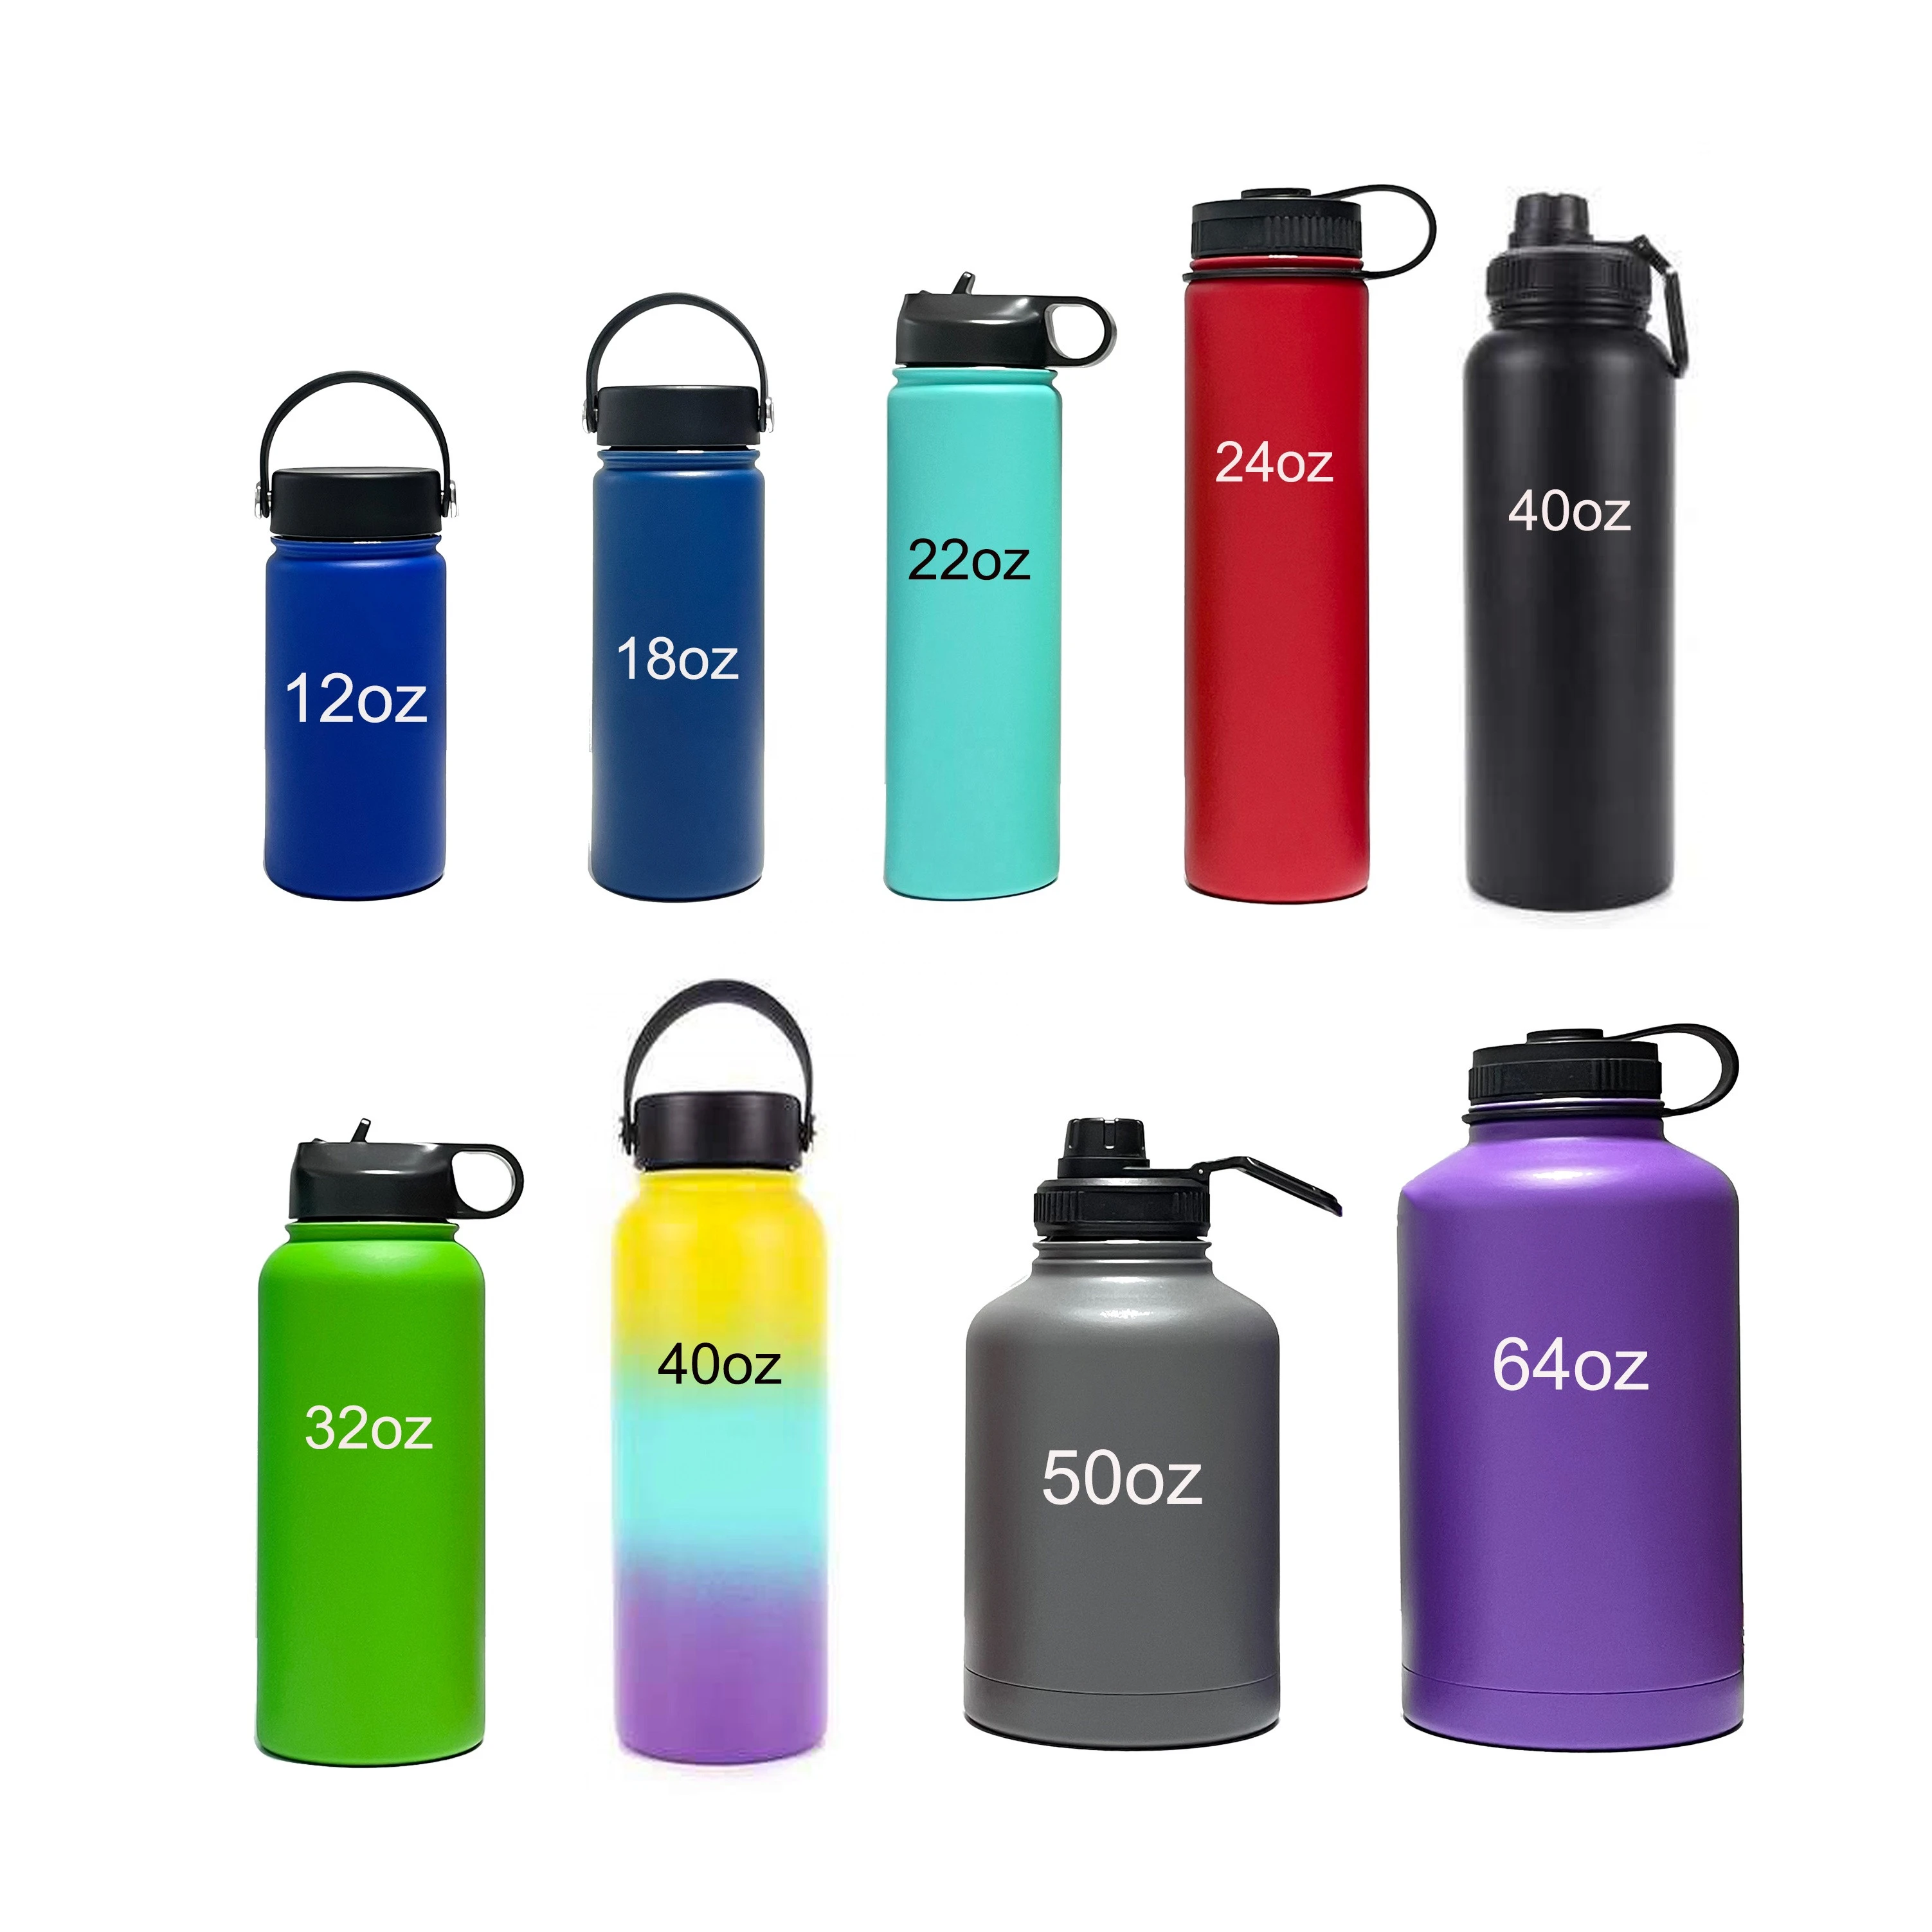 64oz 1900ml Powder Coating Double Wall Camping Hiking Cycling Sport Water Bottle Stainless Steel Travel Bottle Outdoor